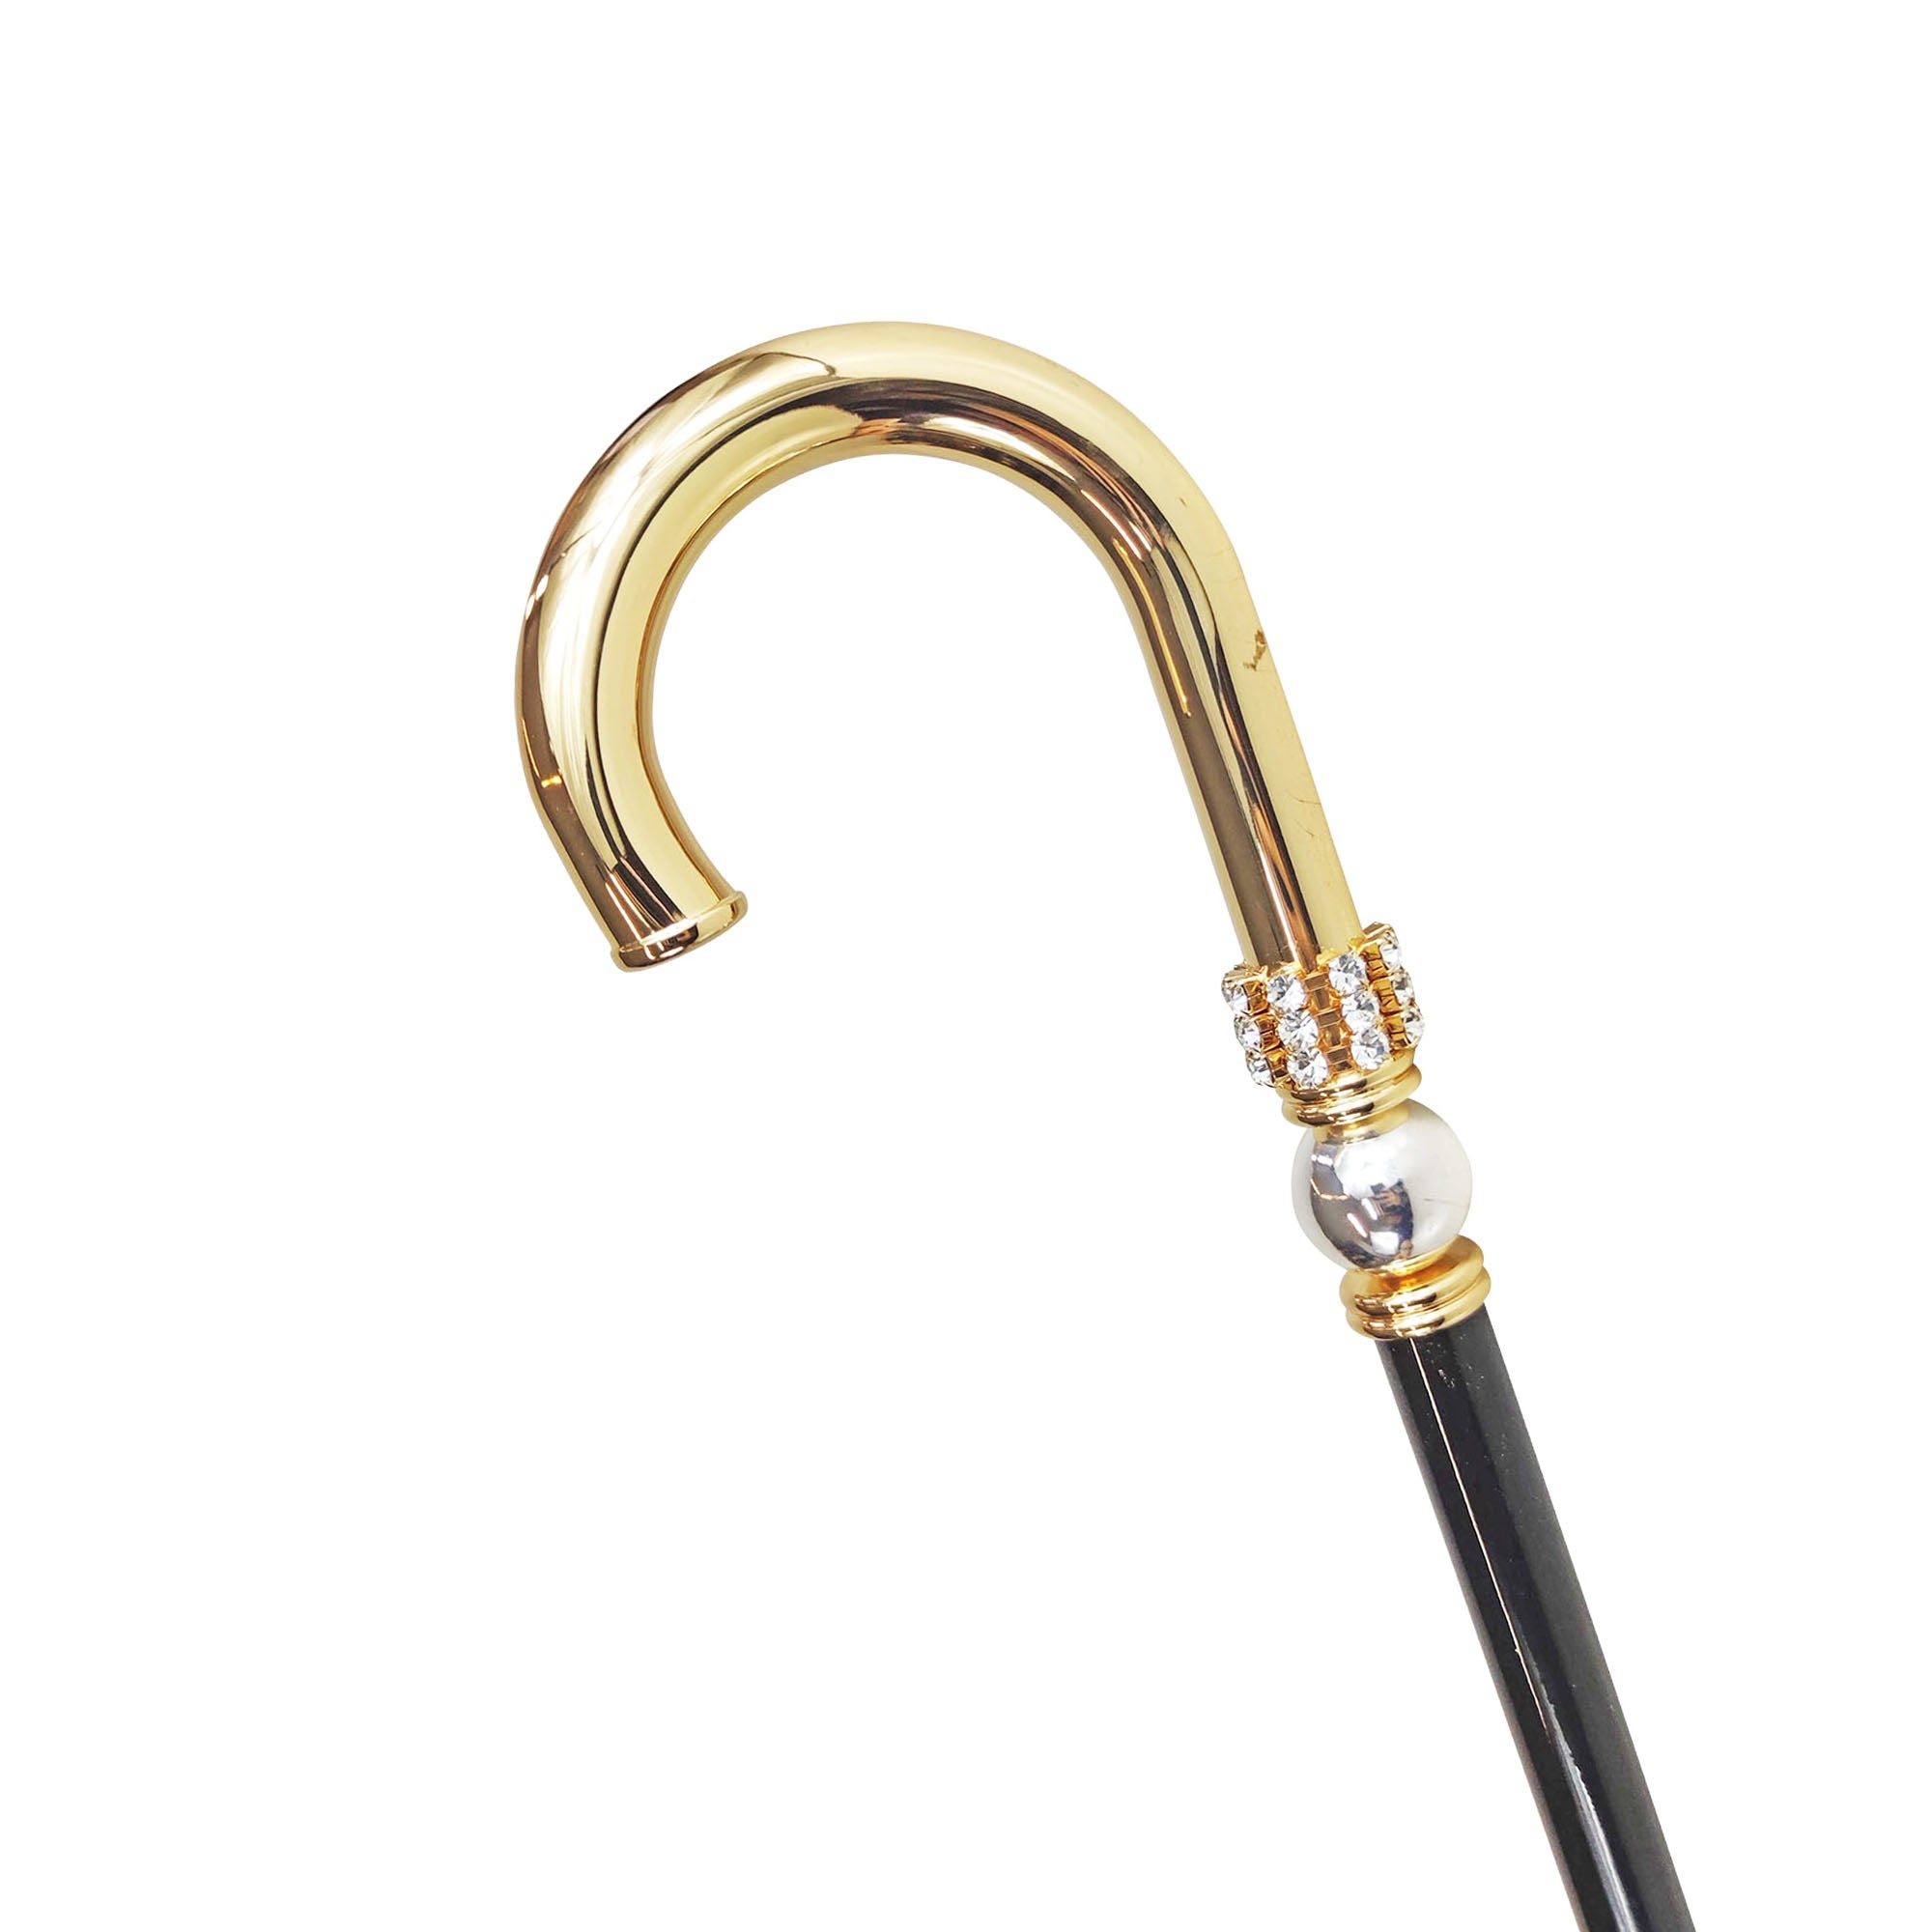 Walking stick for man in brass - 24K goldplated with Silverplated sphere